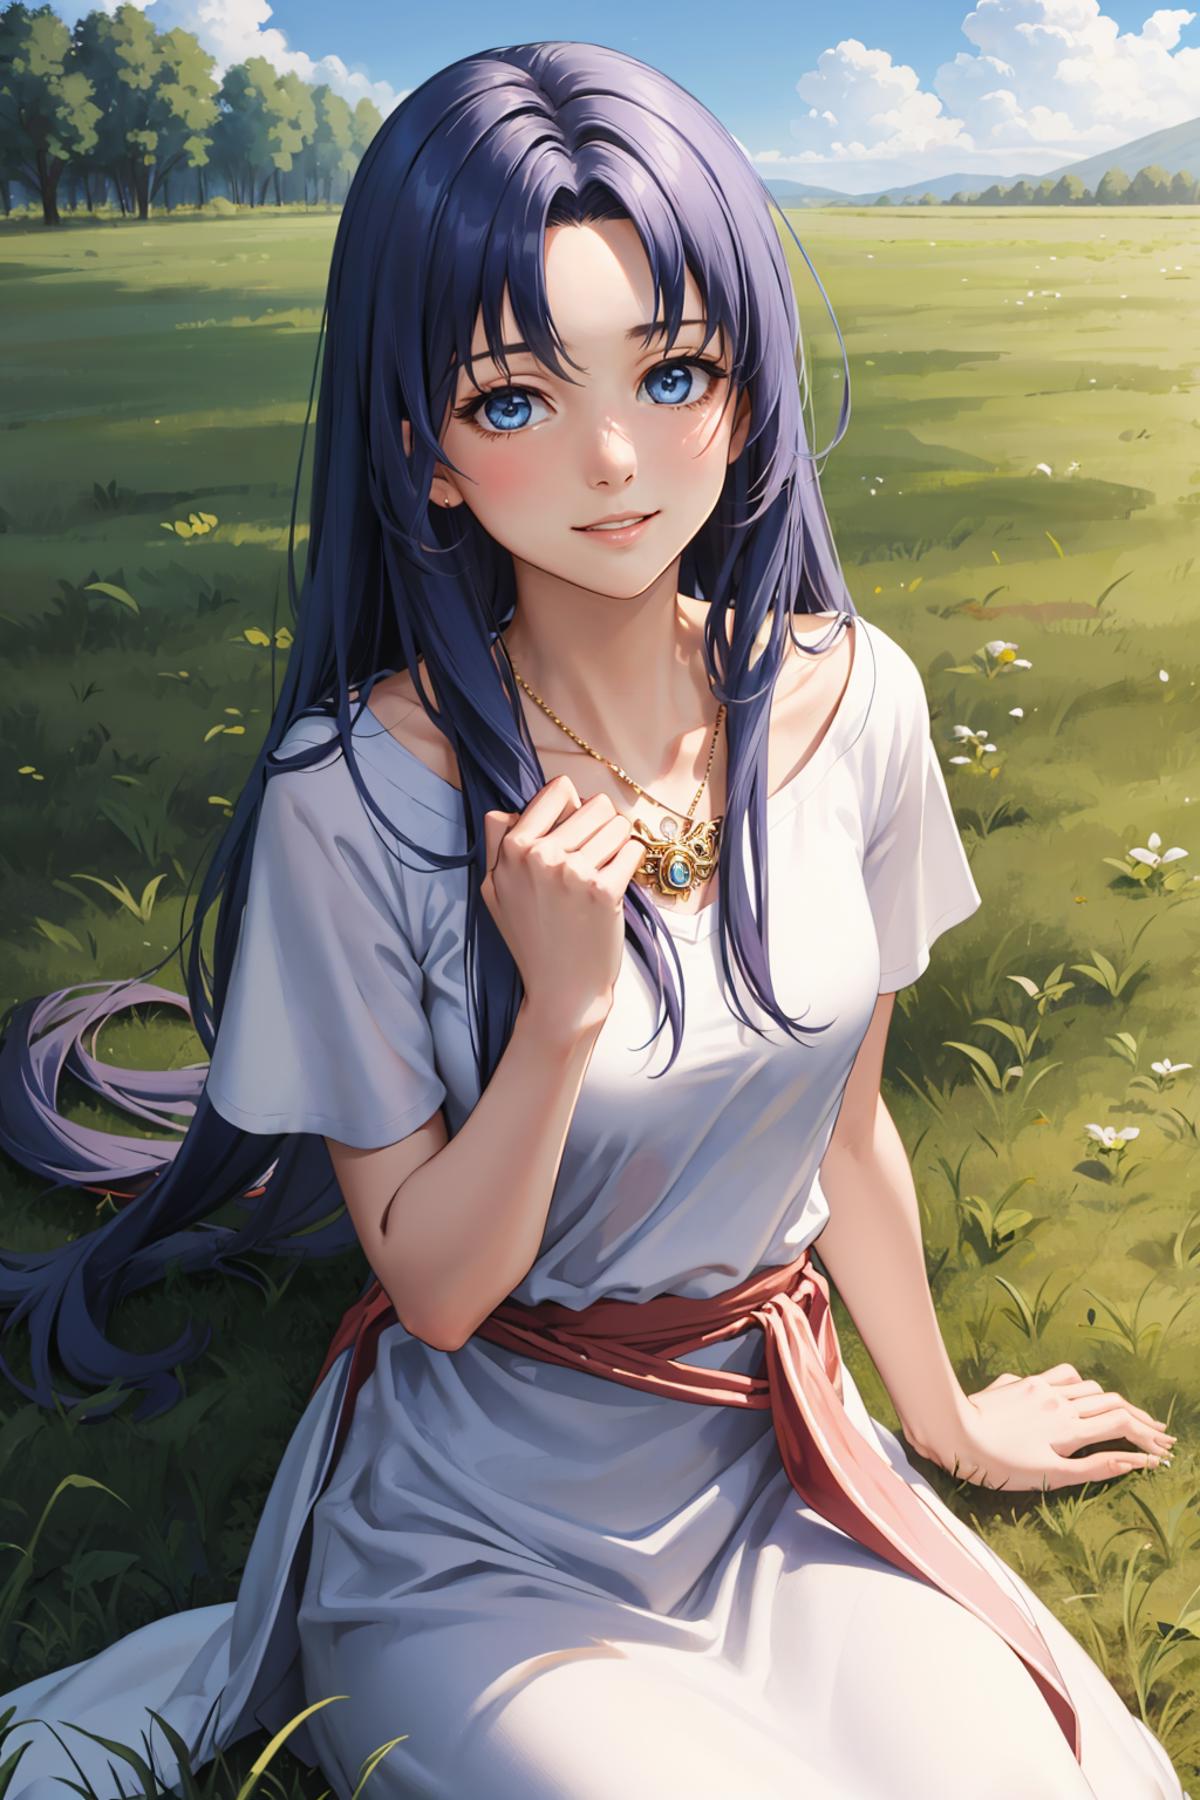 Anime girl with blue eyes, blue hair, and a necklace sitting on the grass.